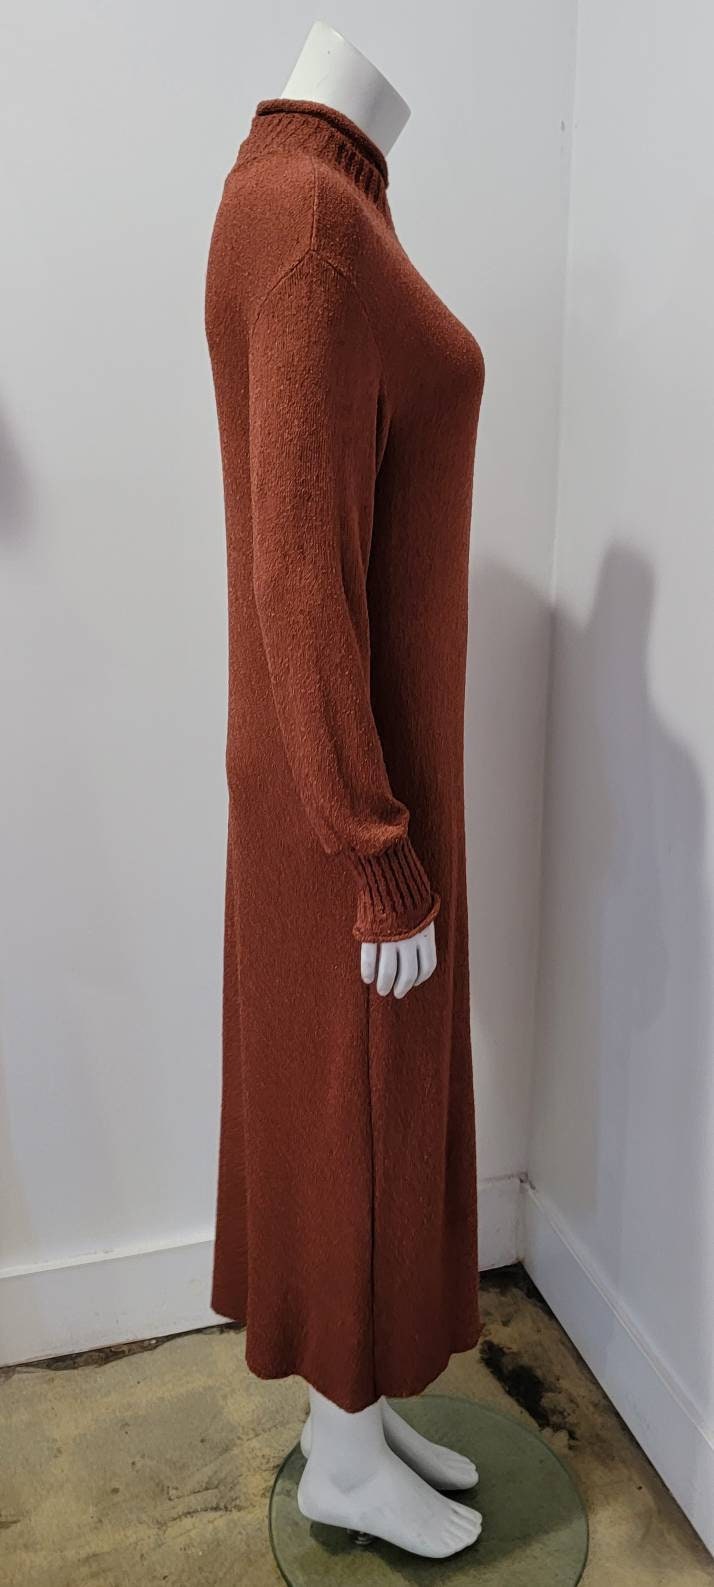 Vintage 80s Rust Mock Neck Tunic Shift Midi Sweater Dress by Brenda French for French Rags